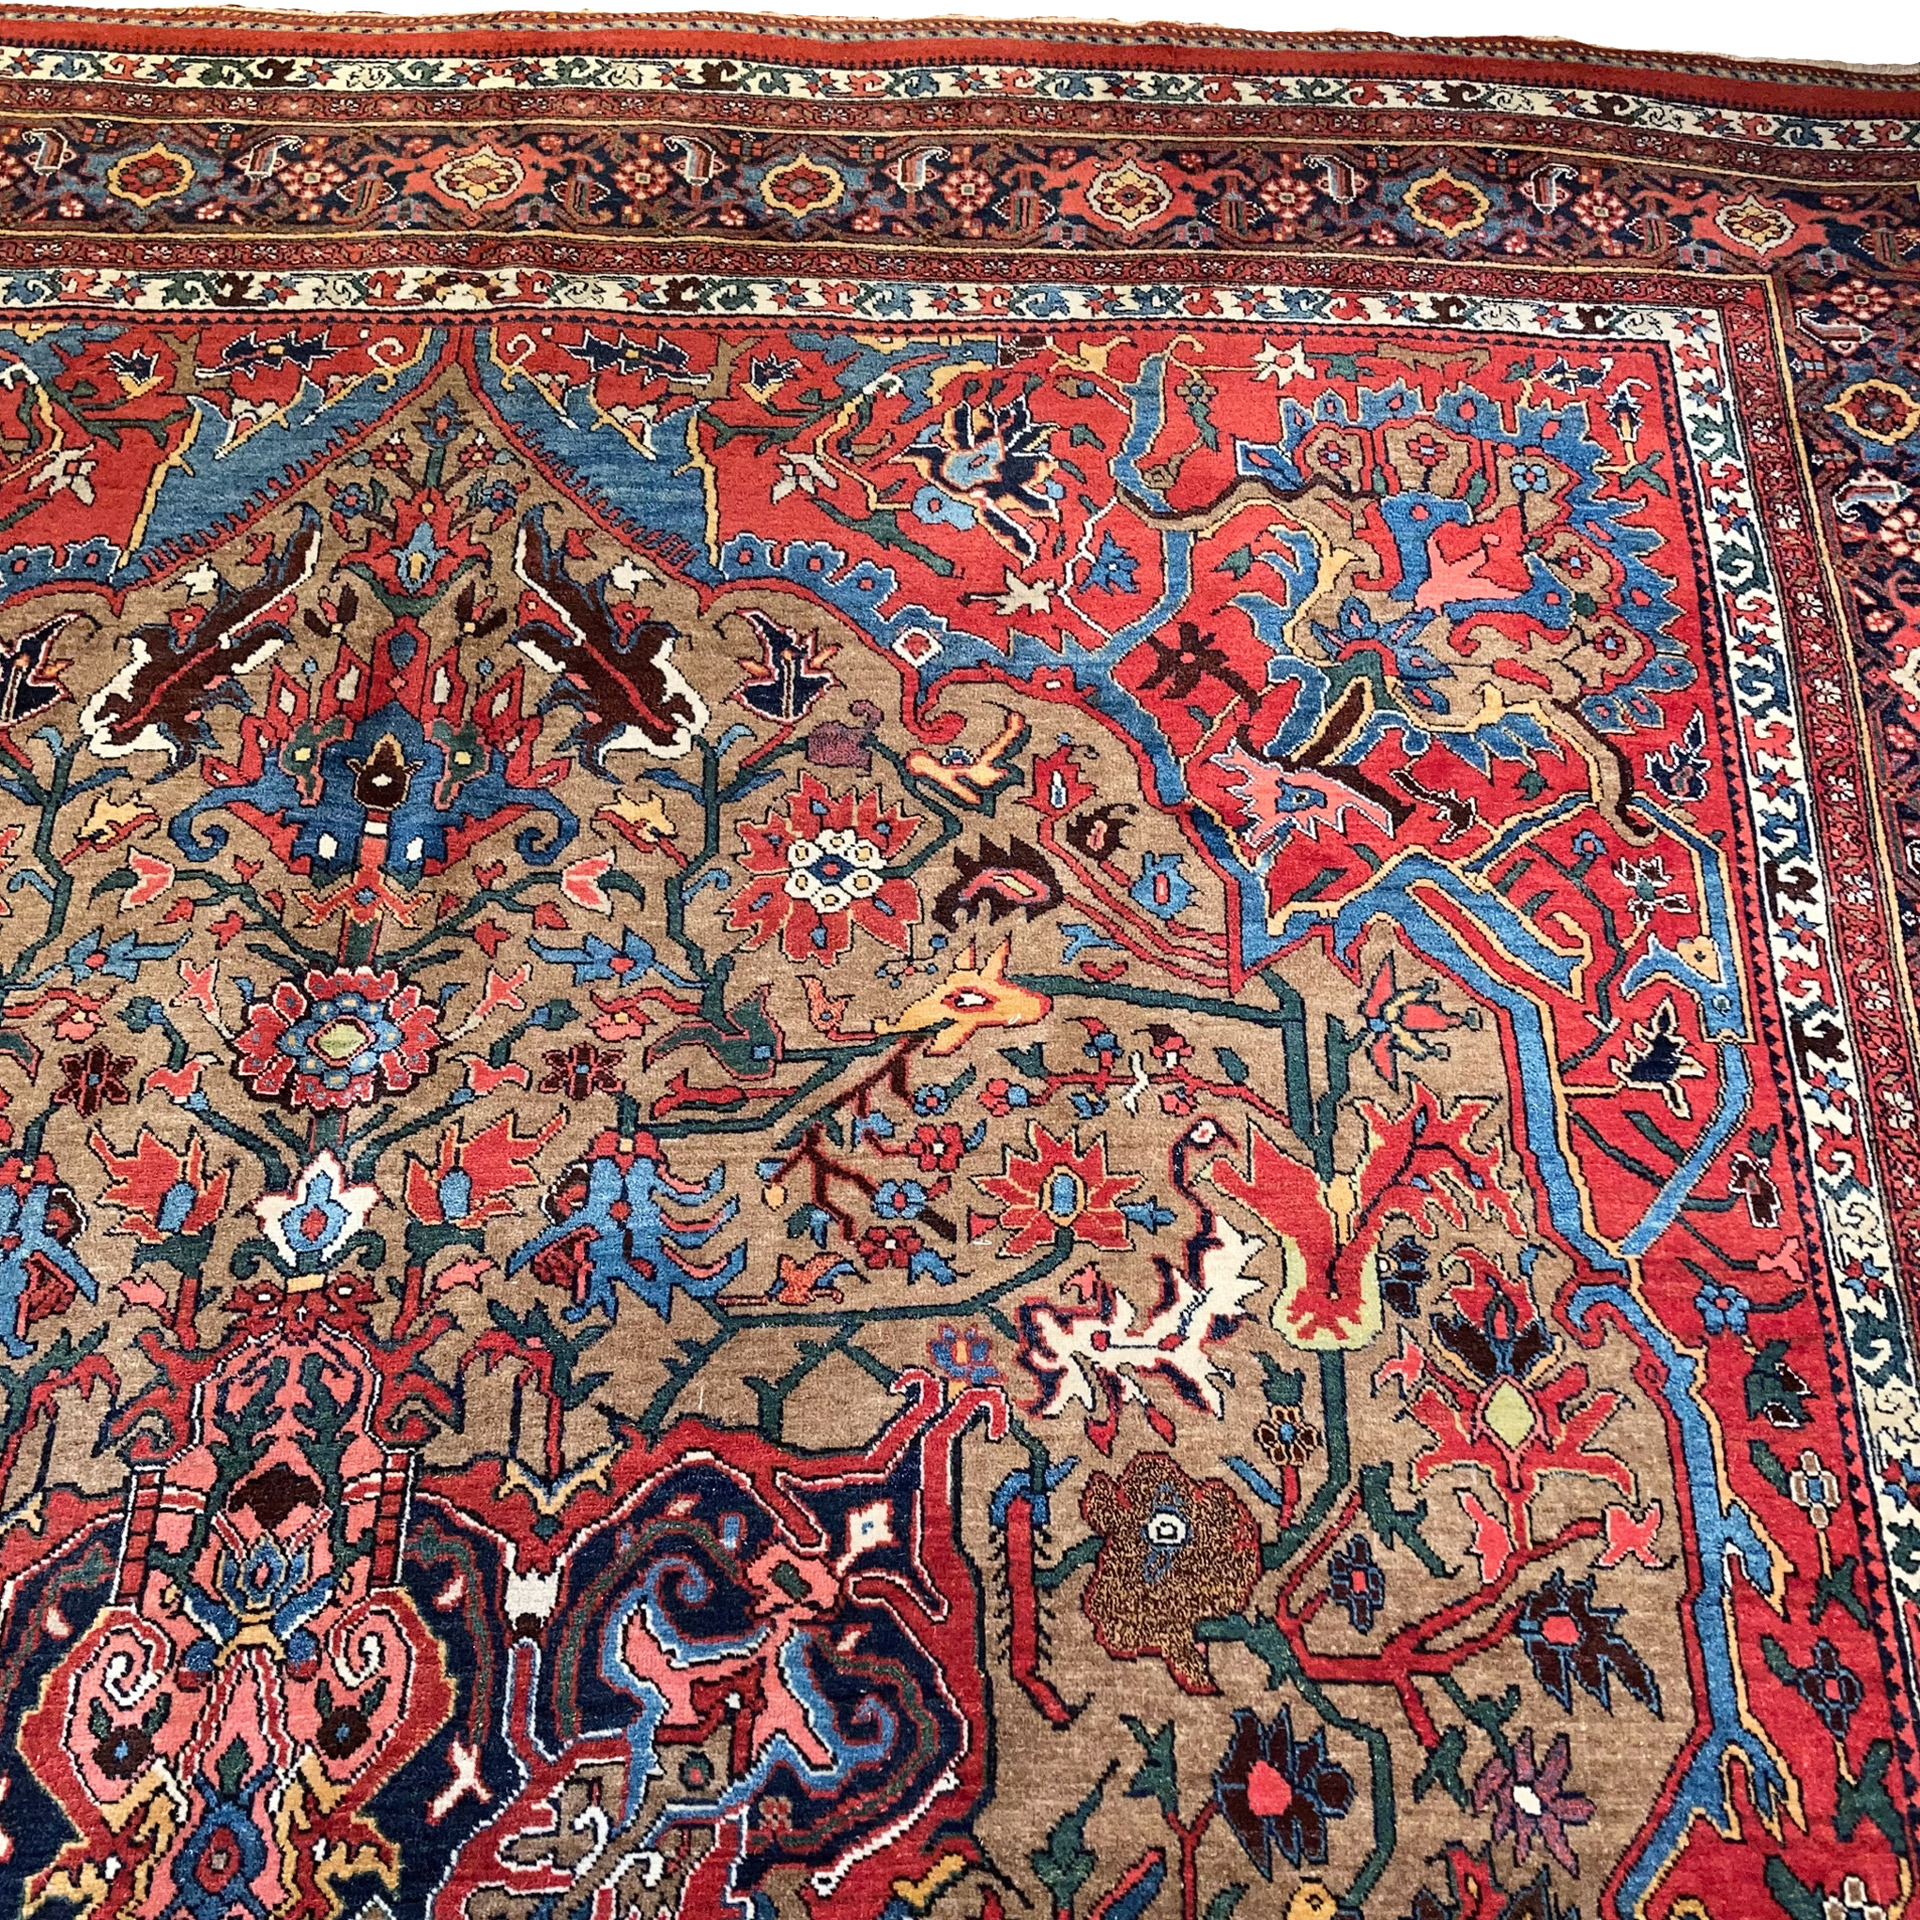 Antique Bidjar carpet with uncommon camel color field framed by a navy blue border, Douglas Stock Gallery, antique Oriental rugs, Persian carpets Boston,MA area, South Natick,MA